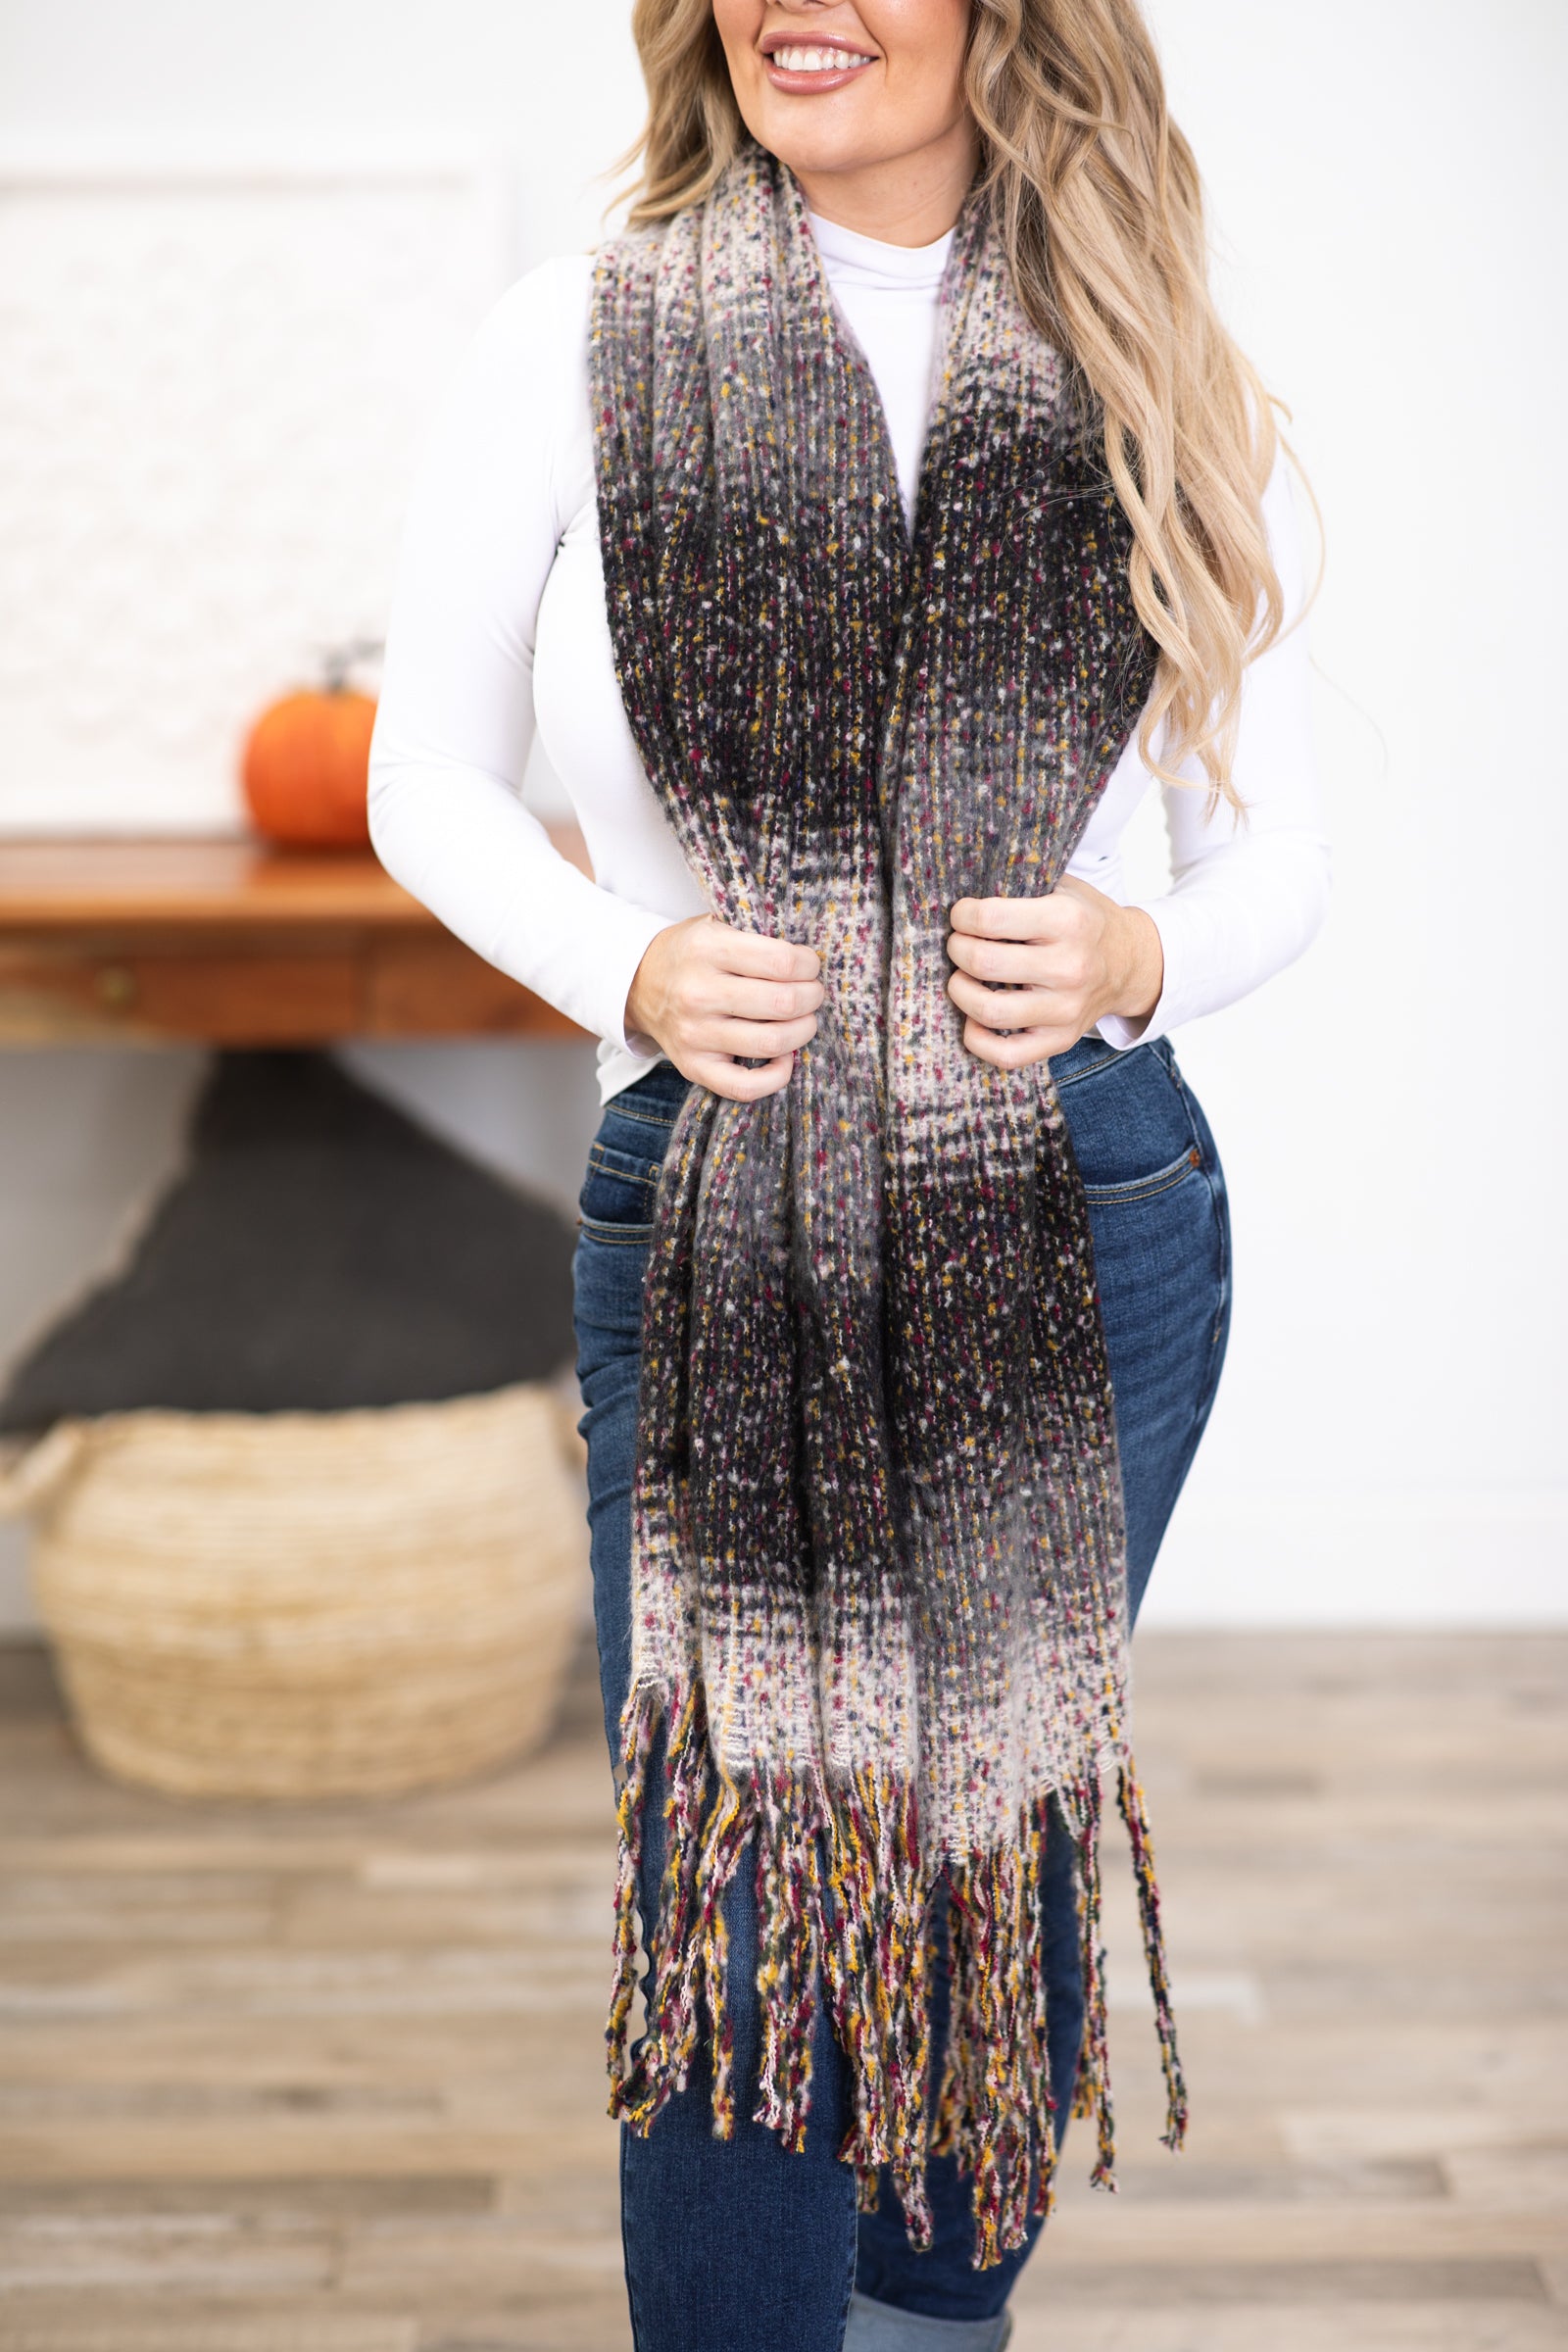 Black and Grey Ombre Long Blanket Scarf